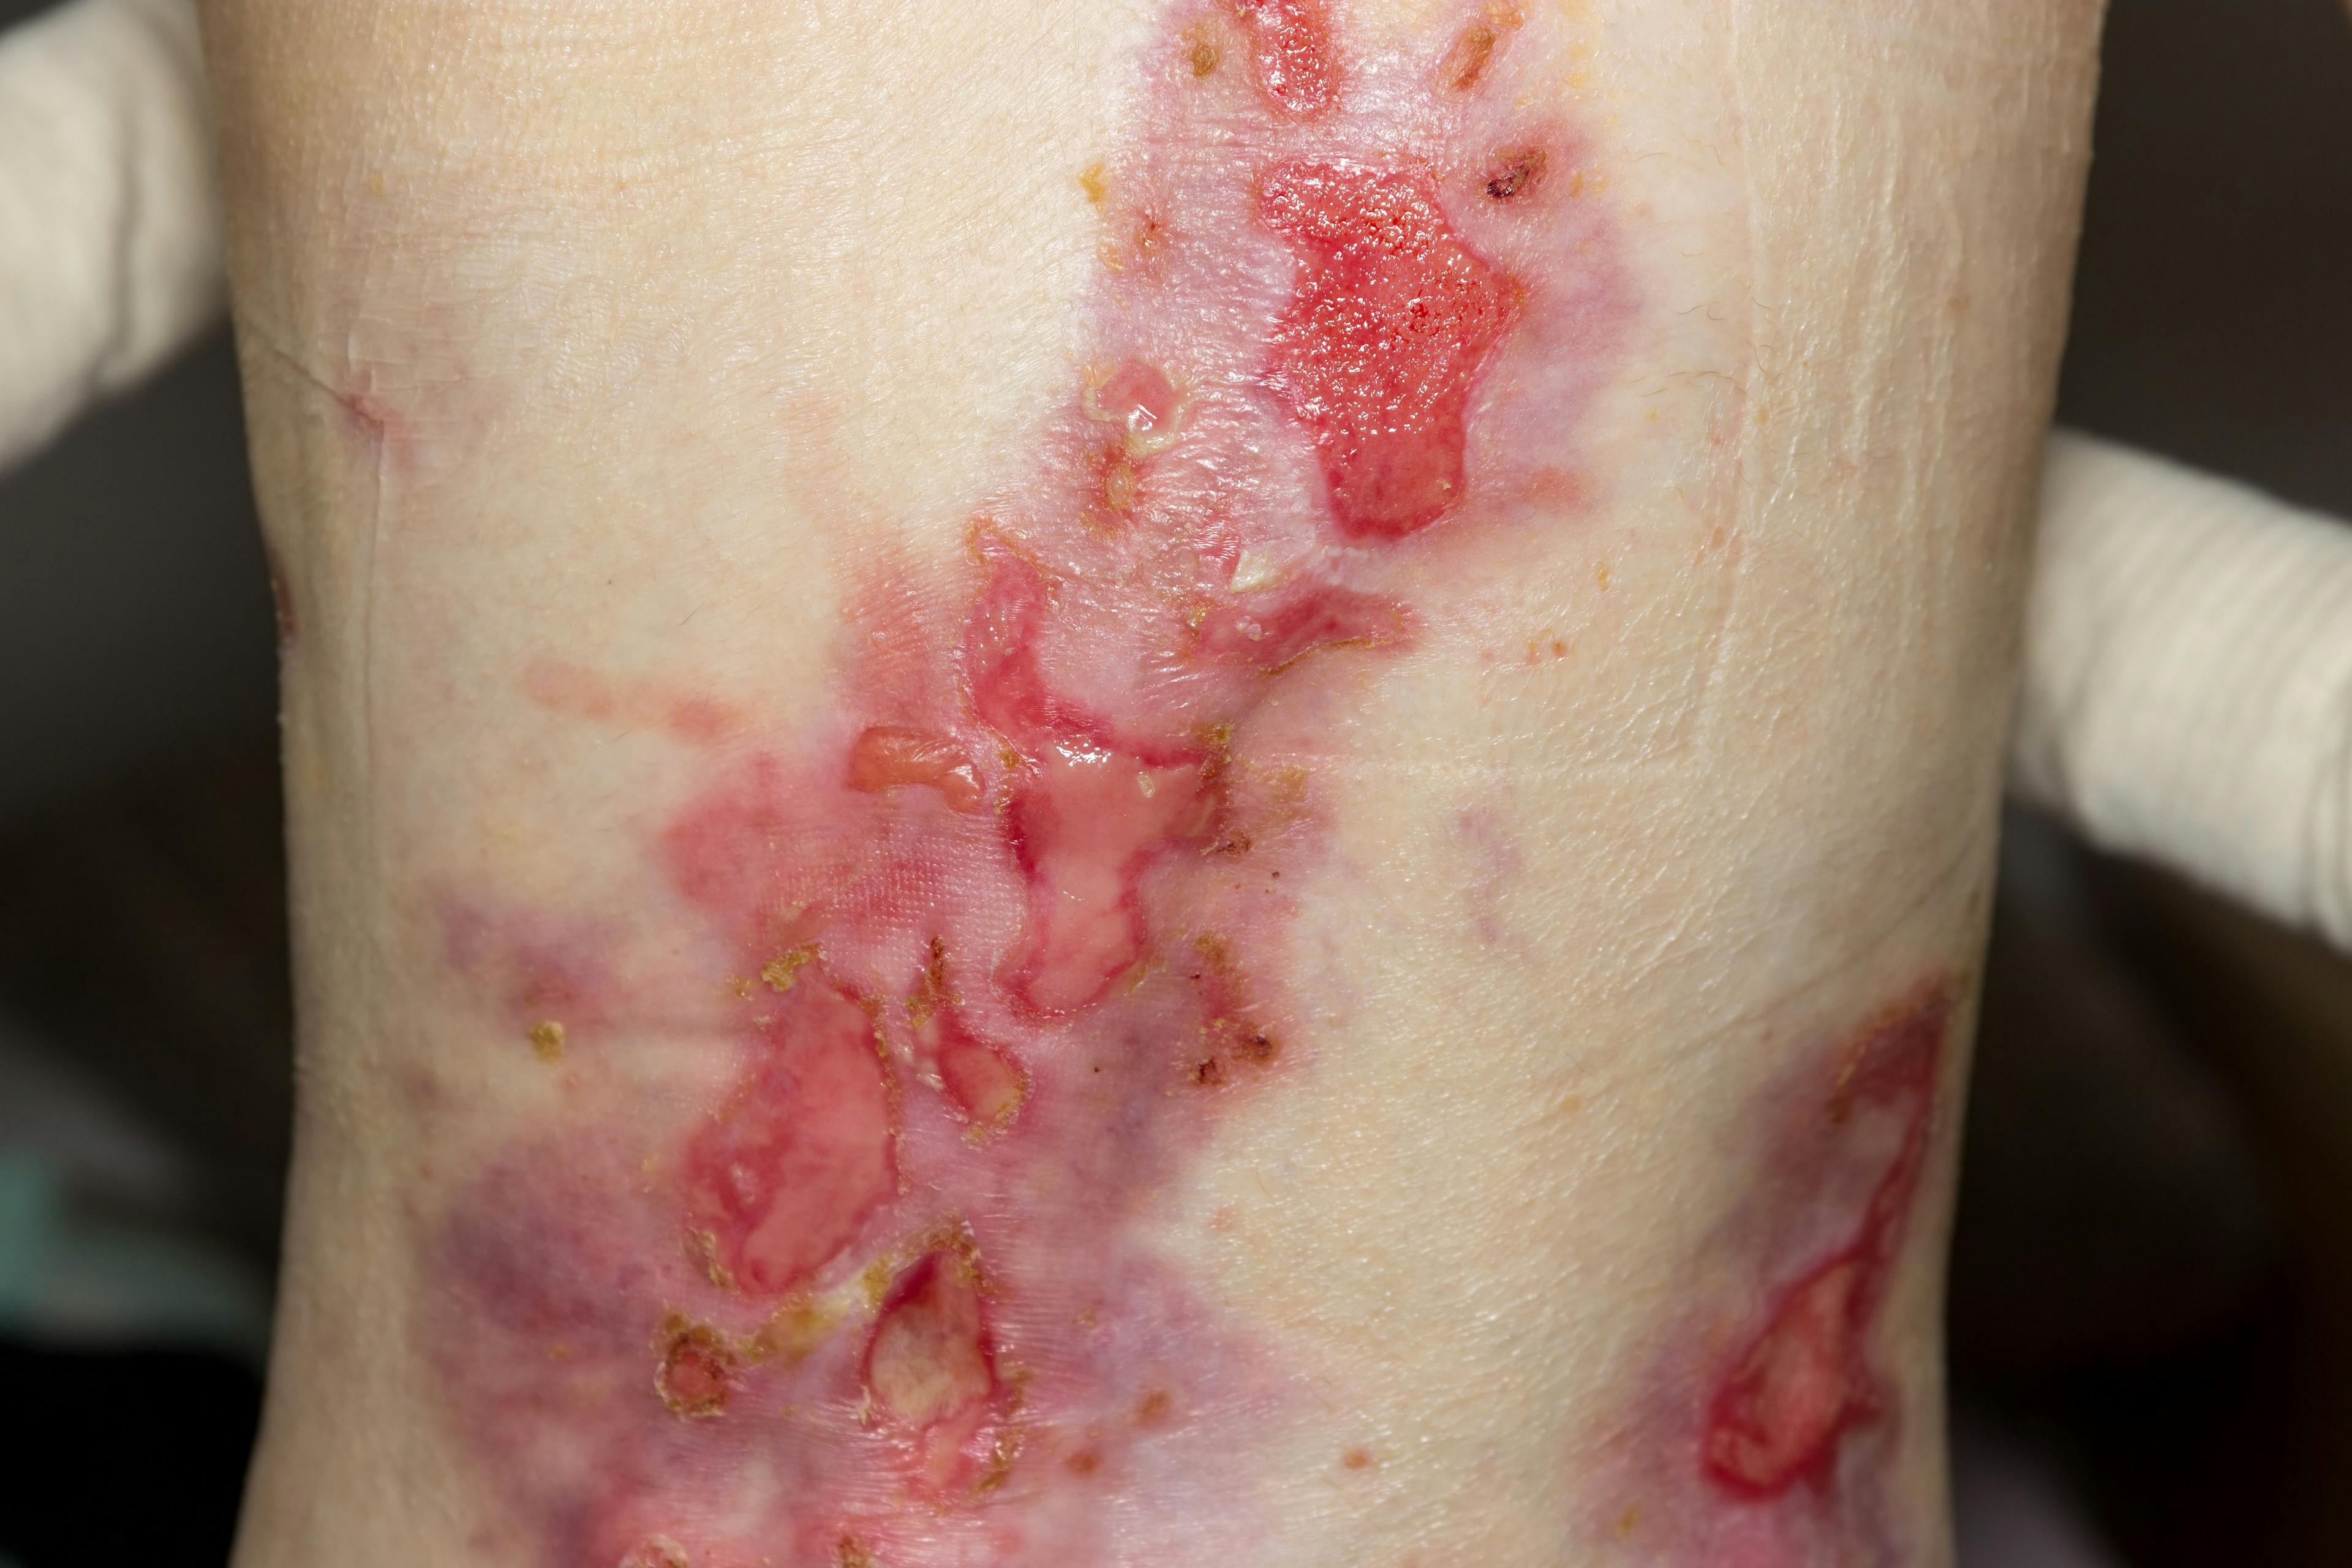 New Hope for Treating the 4 Main Types of Epidermolysis Bullosa